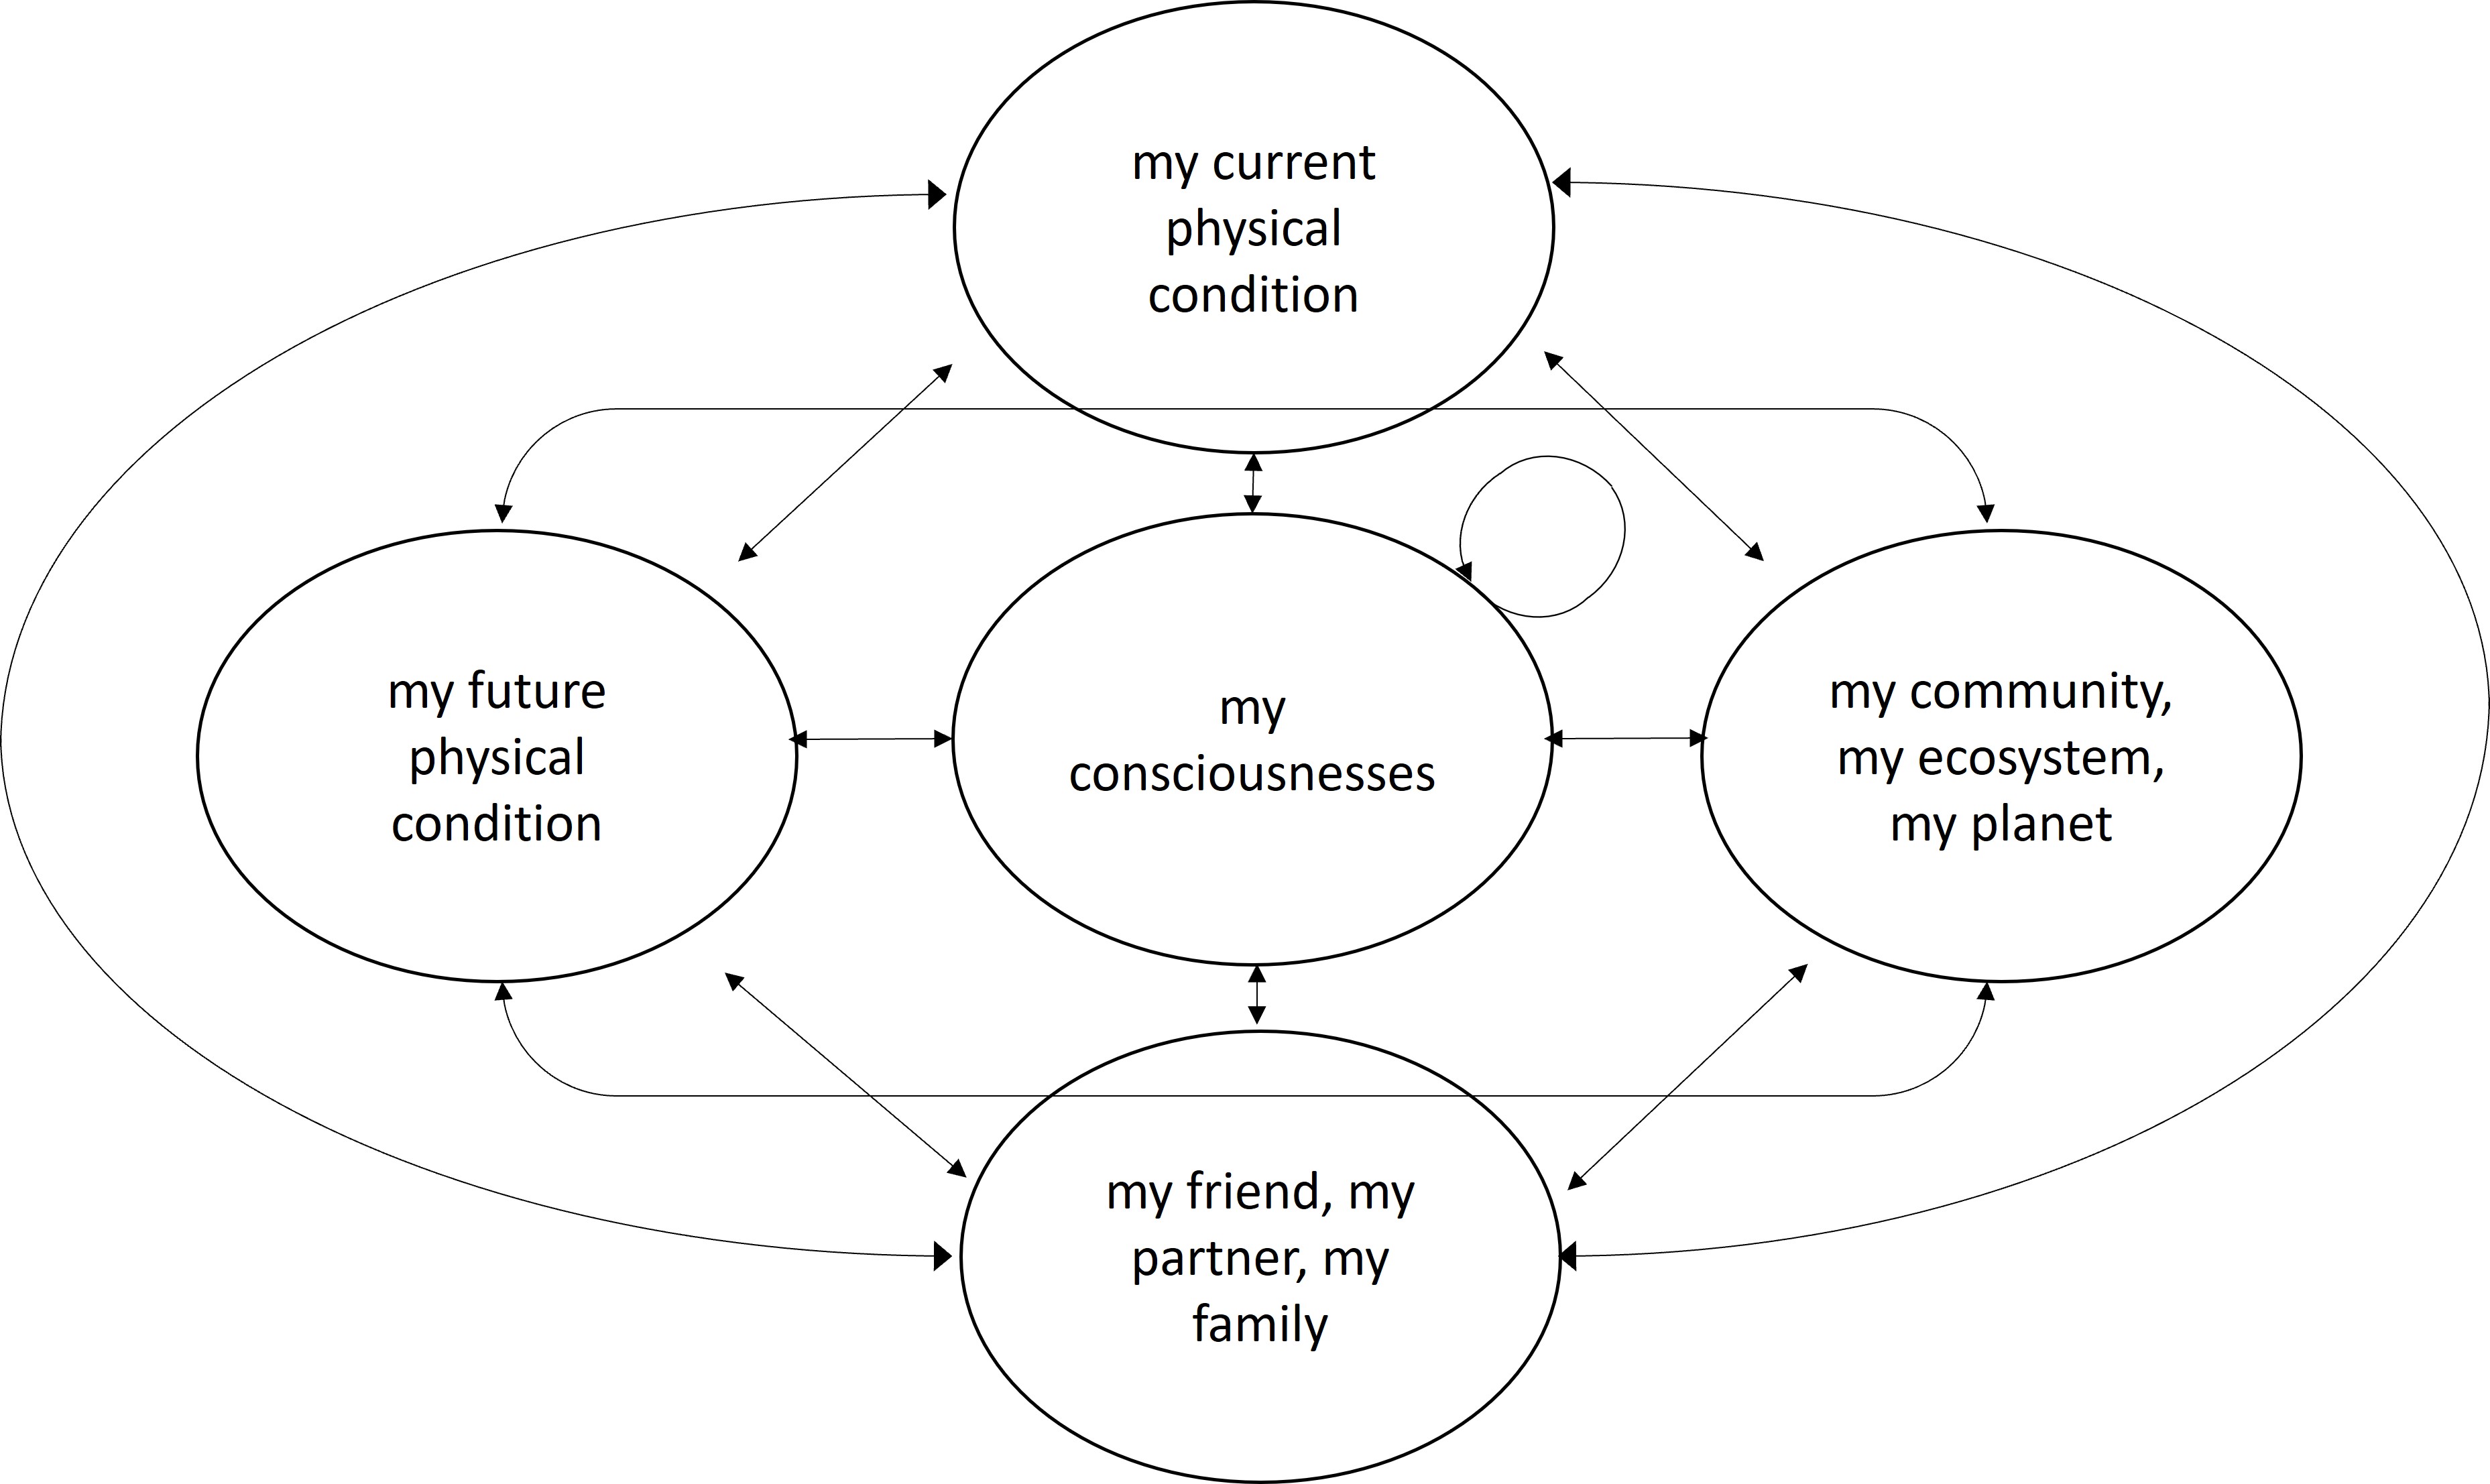 Diagram displaying the interconnected aspects of health; bubbles, each with arrows connecting them read: 'my consciousness', 'my current physical condition', 'my community, my ecosystem, my planet','my friend, my partner, my family', 'my future physical condition' 